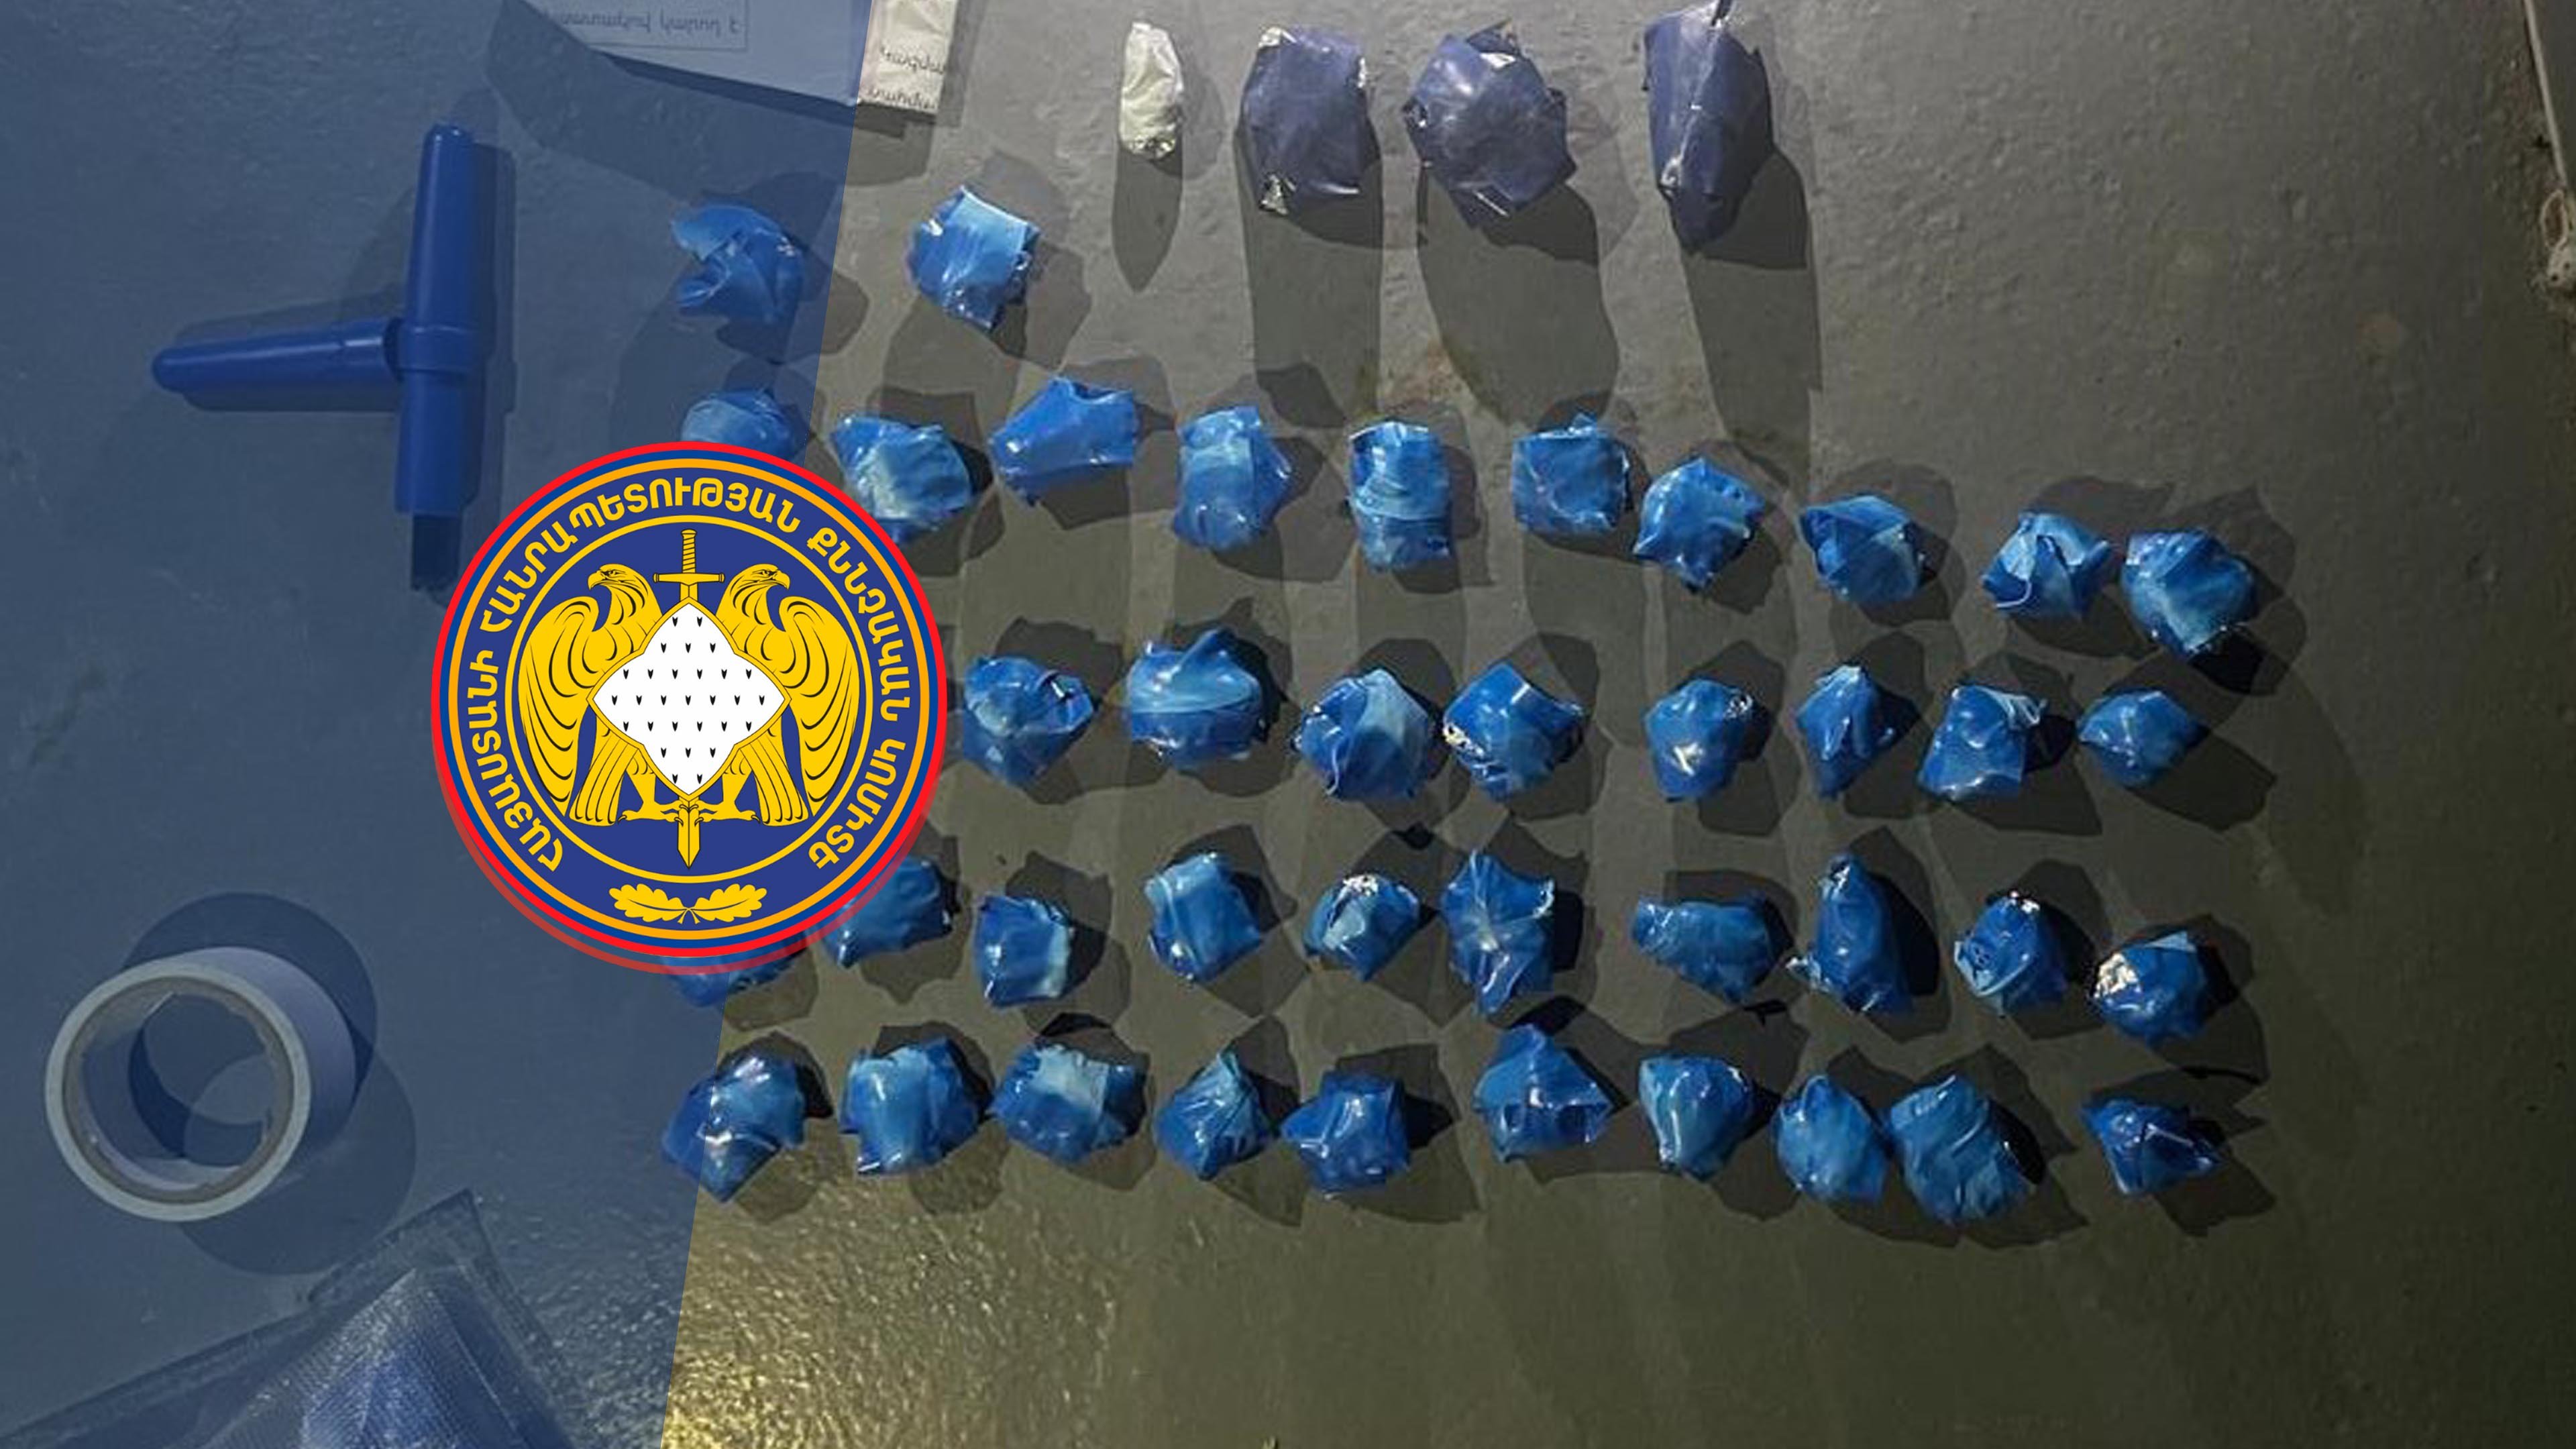 Case of Illegal Turnover of Narcotic Drugs in Particularly Large Amount by Using Social Site Disclosed; 21 year-old Young Man Detained (photos)